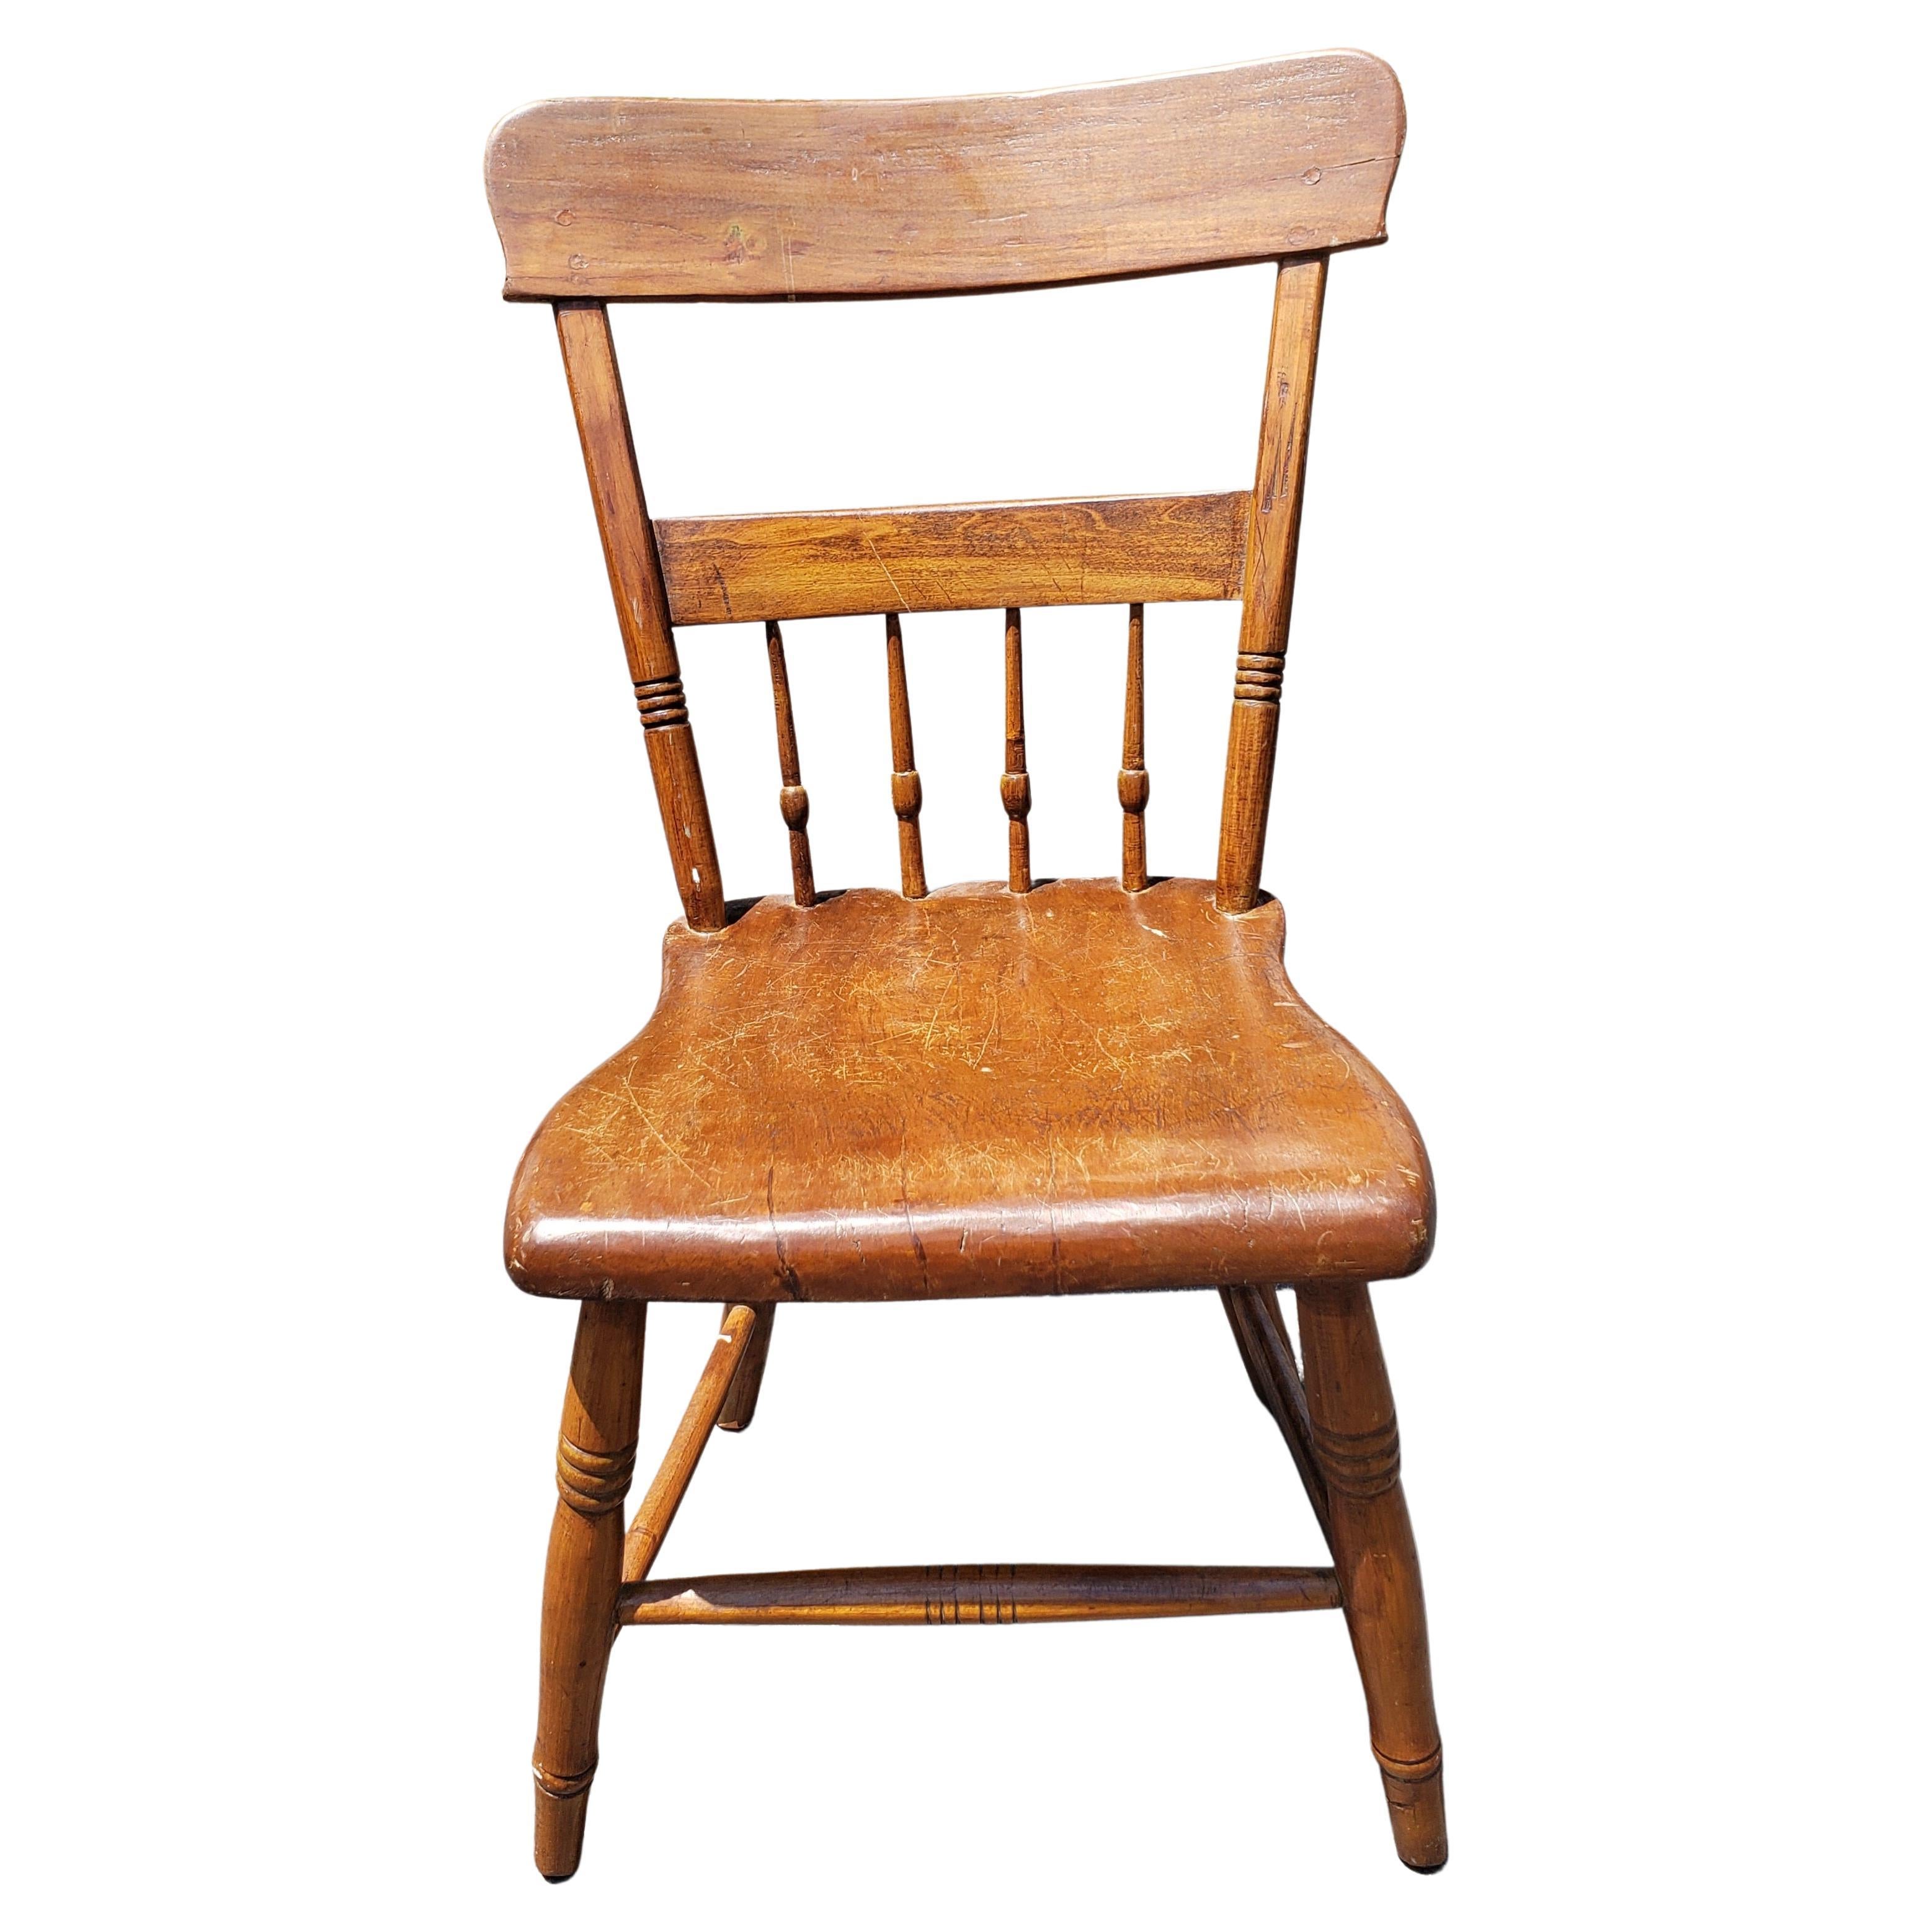 A Late 19th Century Early American style HandCrafted Maple Plank Chair with great aging patina. It will make a great addition to your collection.
Maesures 18.5